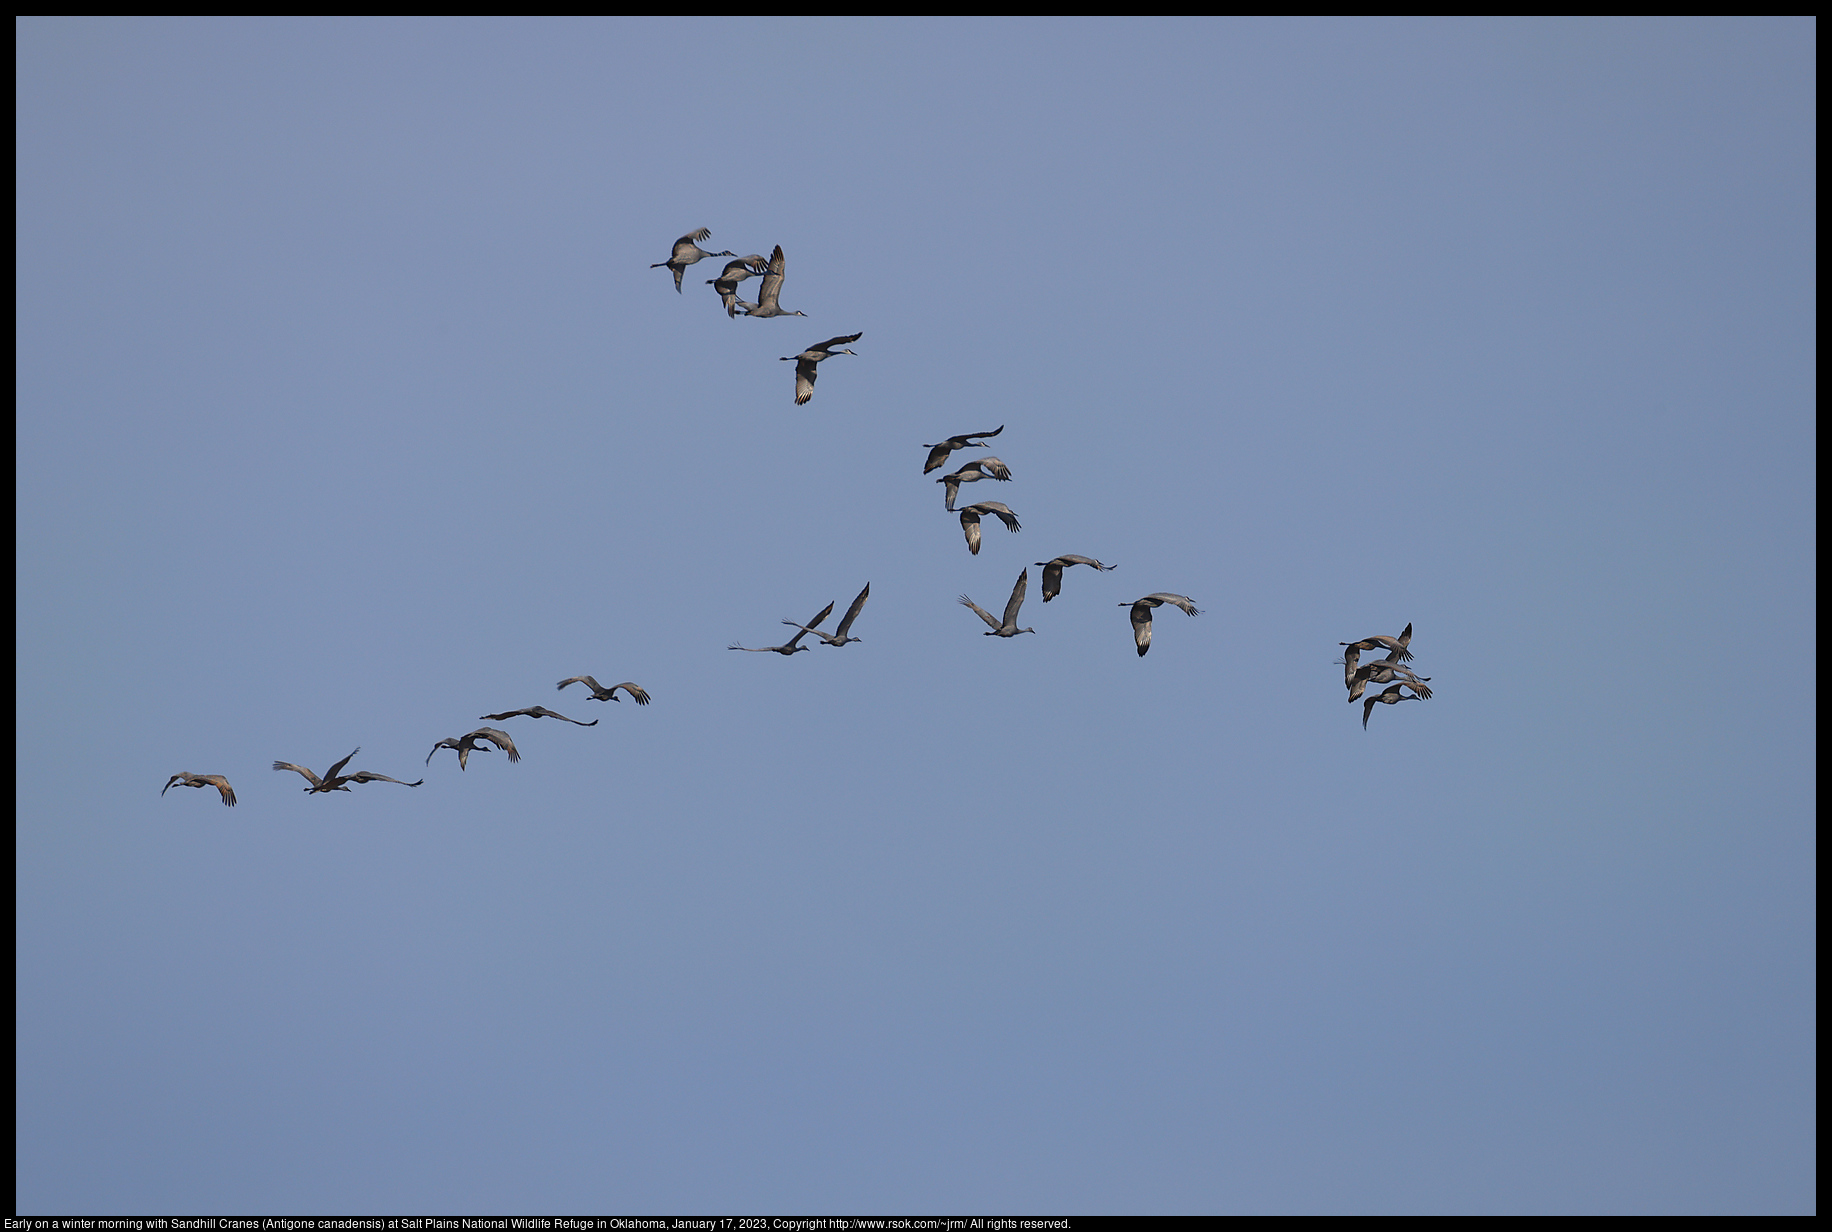 Early on a winter morning with Sandhill Cranes (Antigone canadensis) at Salt Plains National Wildlife Refuge in Oklahoma, January 17, 2023